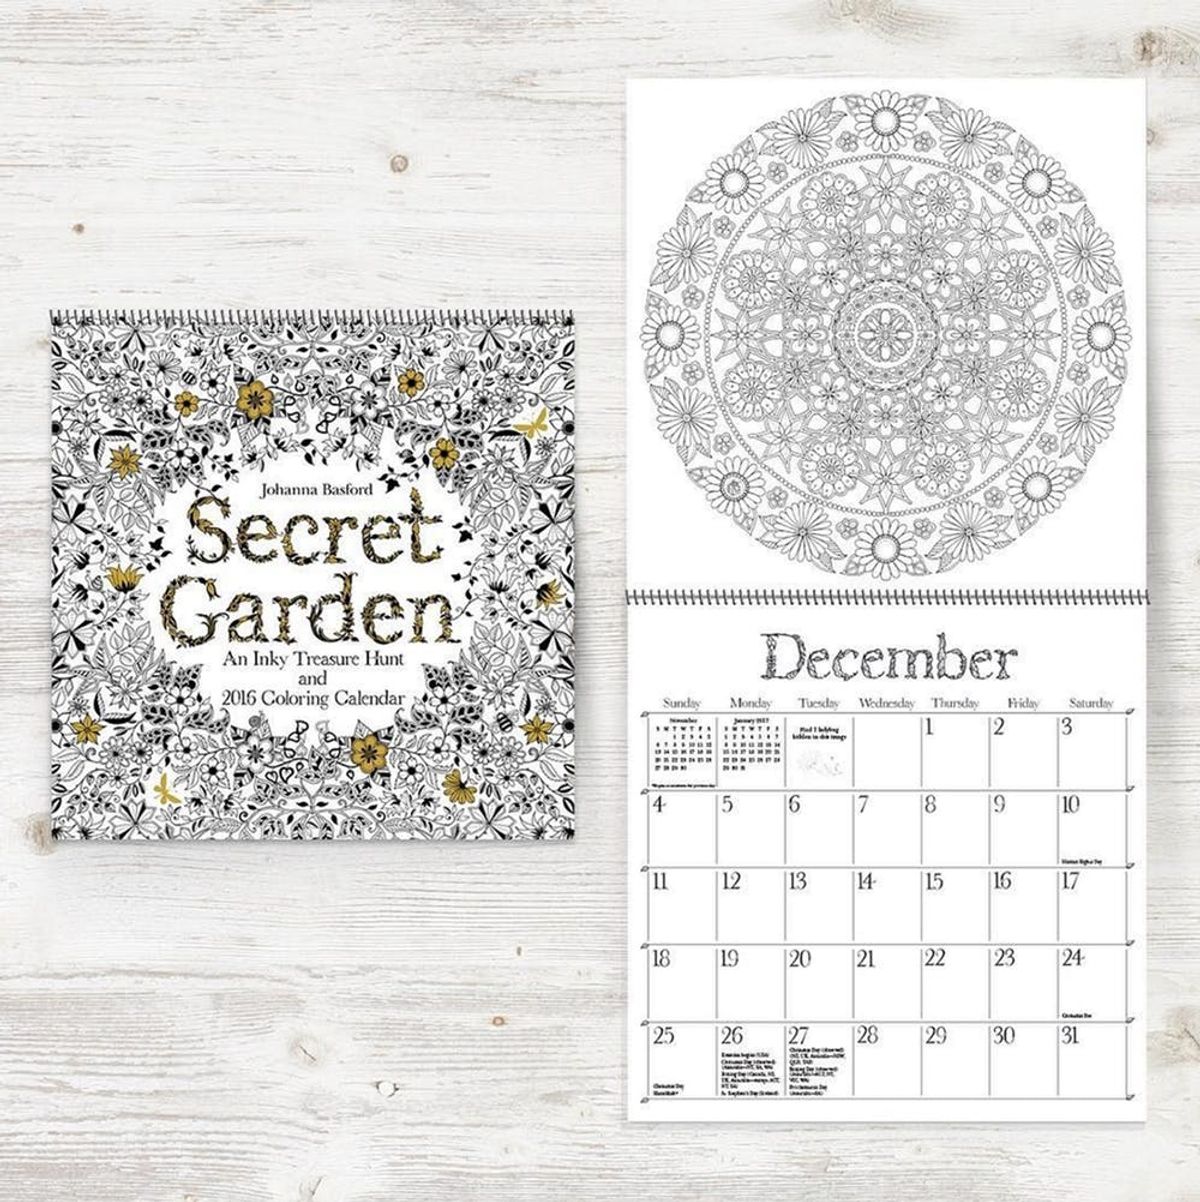 Johanna Basford’s New Coloring Book Calendar Is the Perfect Way to Start 2016